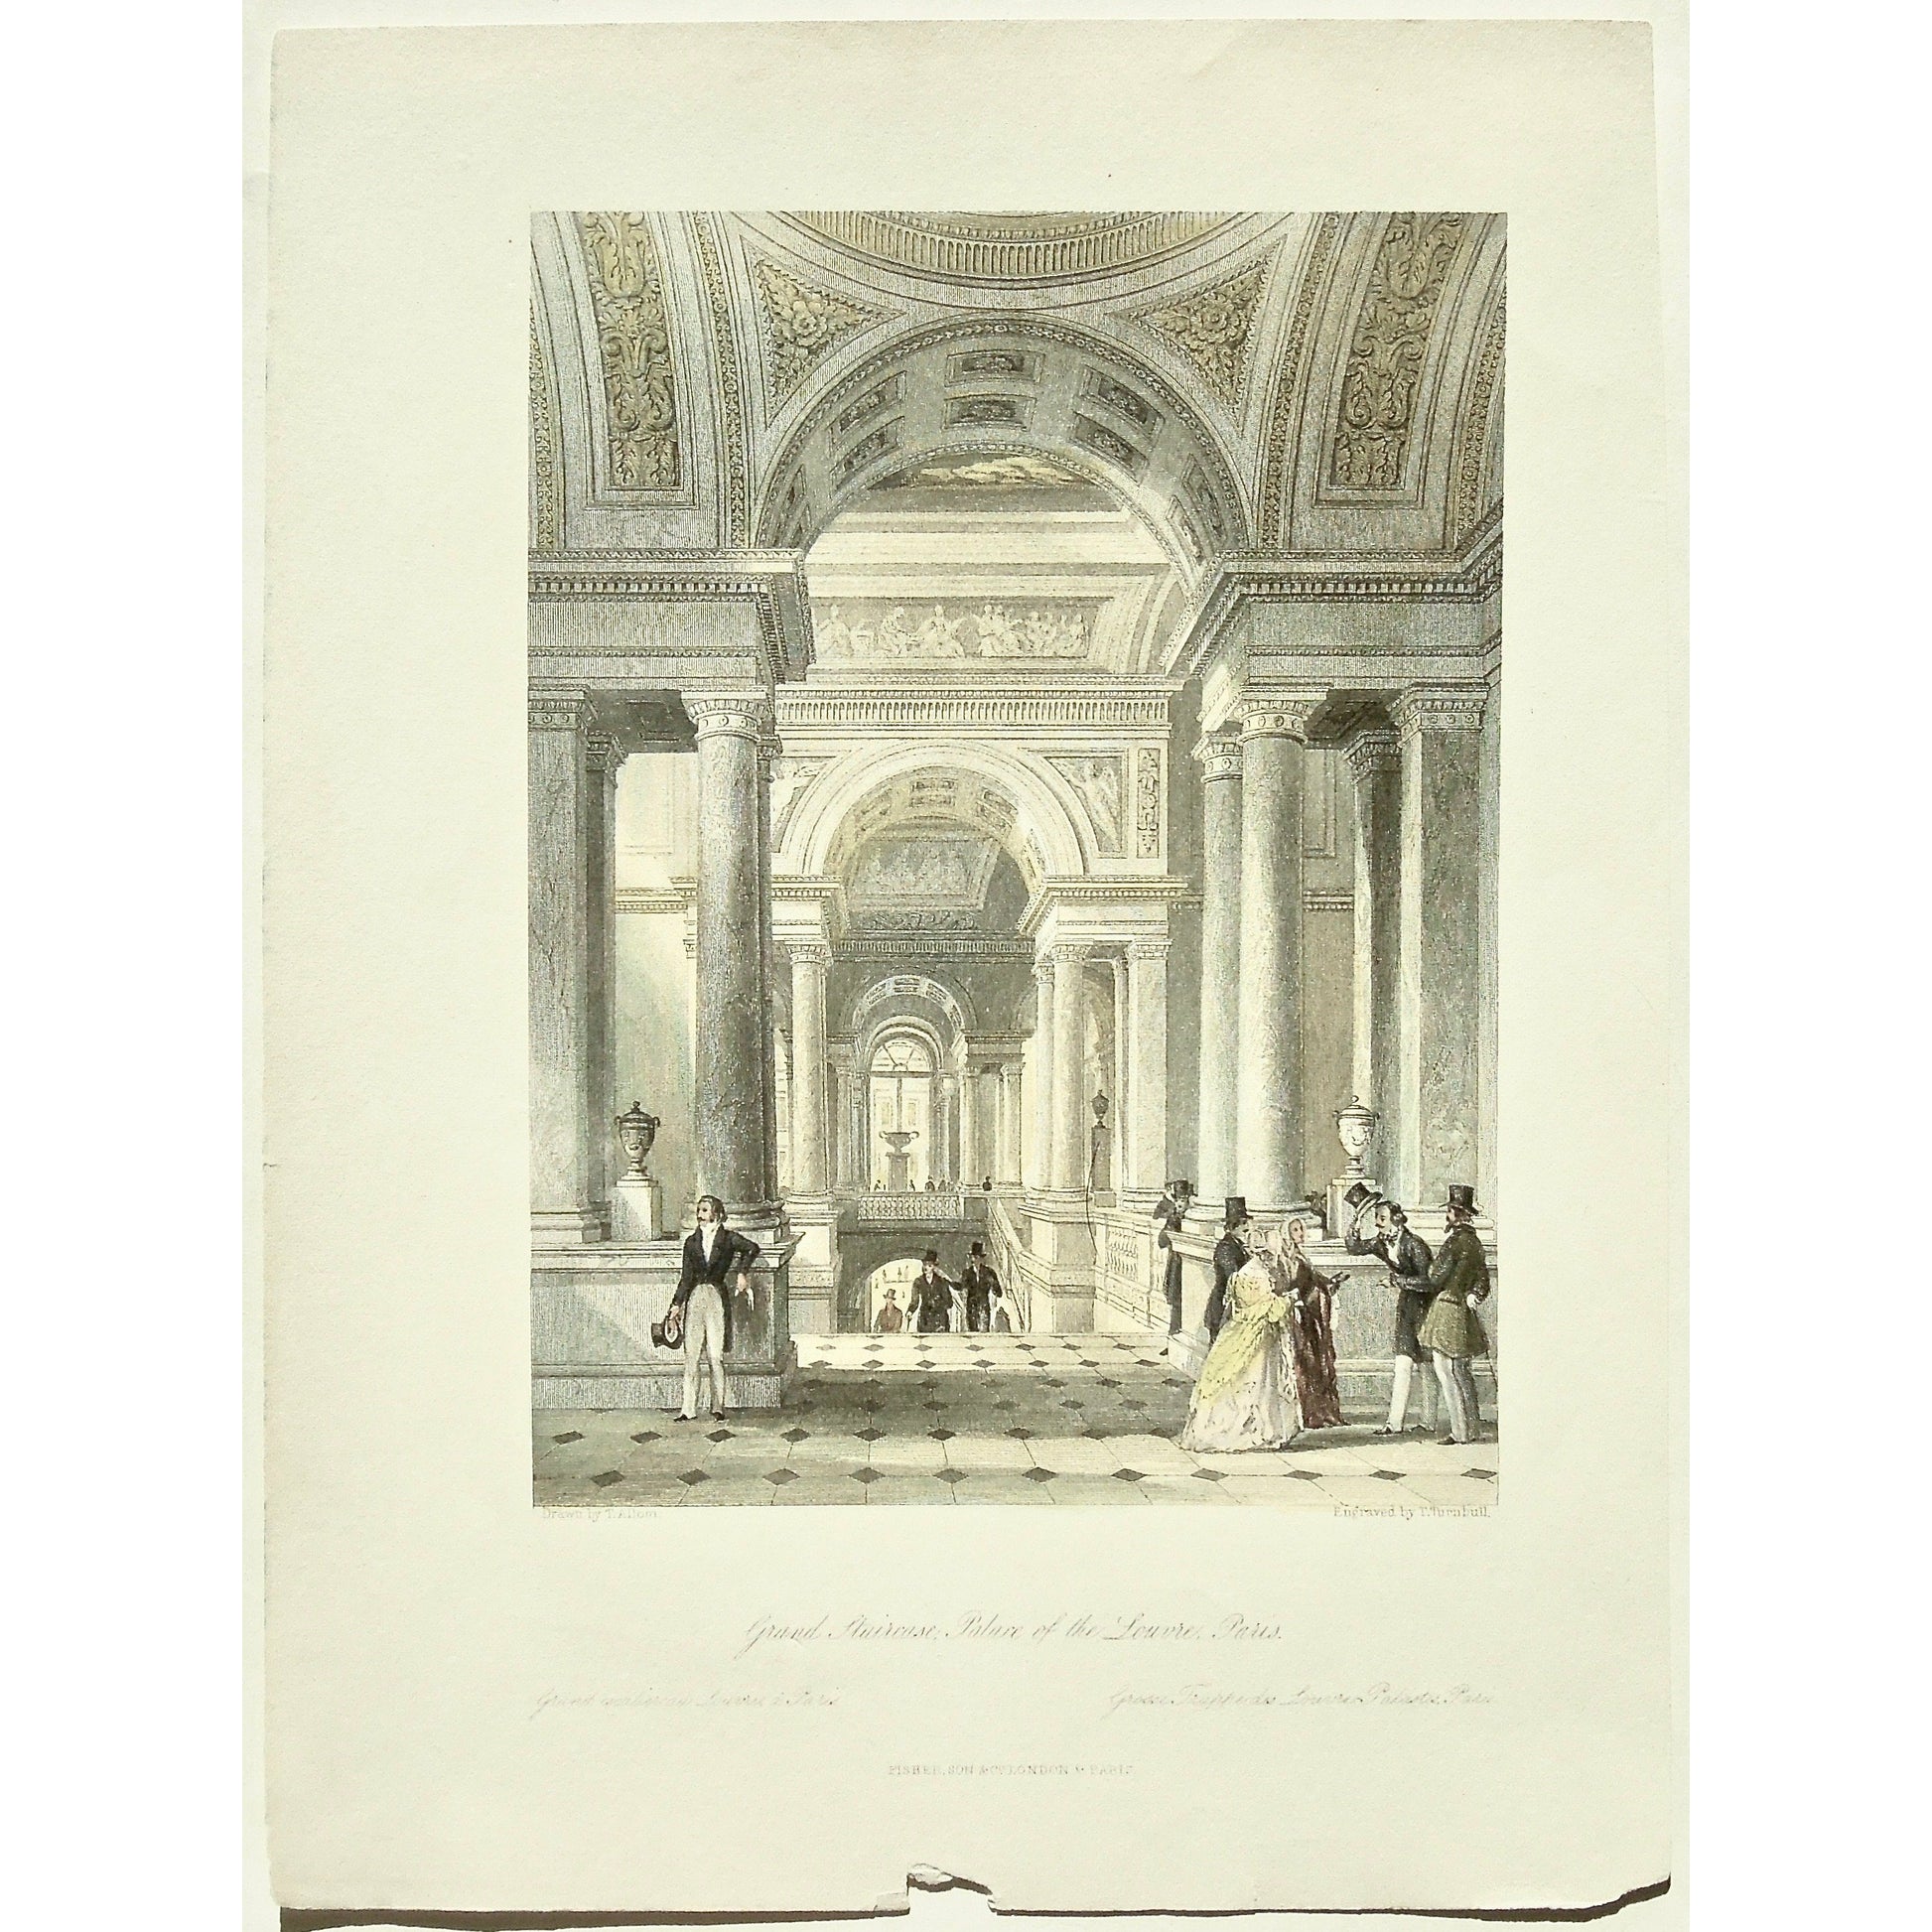 France, France Illustrated, Exhibiting its Landscape Scenery, Antiquities, Military and Ecclesiastical Architecture, Thomas Allom, Allom, Fisher, Son & Co., London, Paris, Reverend George Newenham, Newenham, Caxton Press, Angel St., Martin's-Le-Grand, Mandeville, Neuve Vivienne, 1845, Grand Staircase, Staircase, Louvre, Palais de Louvre, Palace of the Louvre, Palace, architecture, interior, domed ceiling, dome, social, socializing, society, People, Dresses, dress, Paris, socialites, columns, top hats, arch